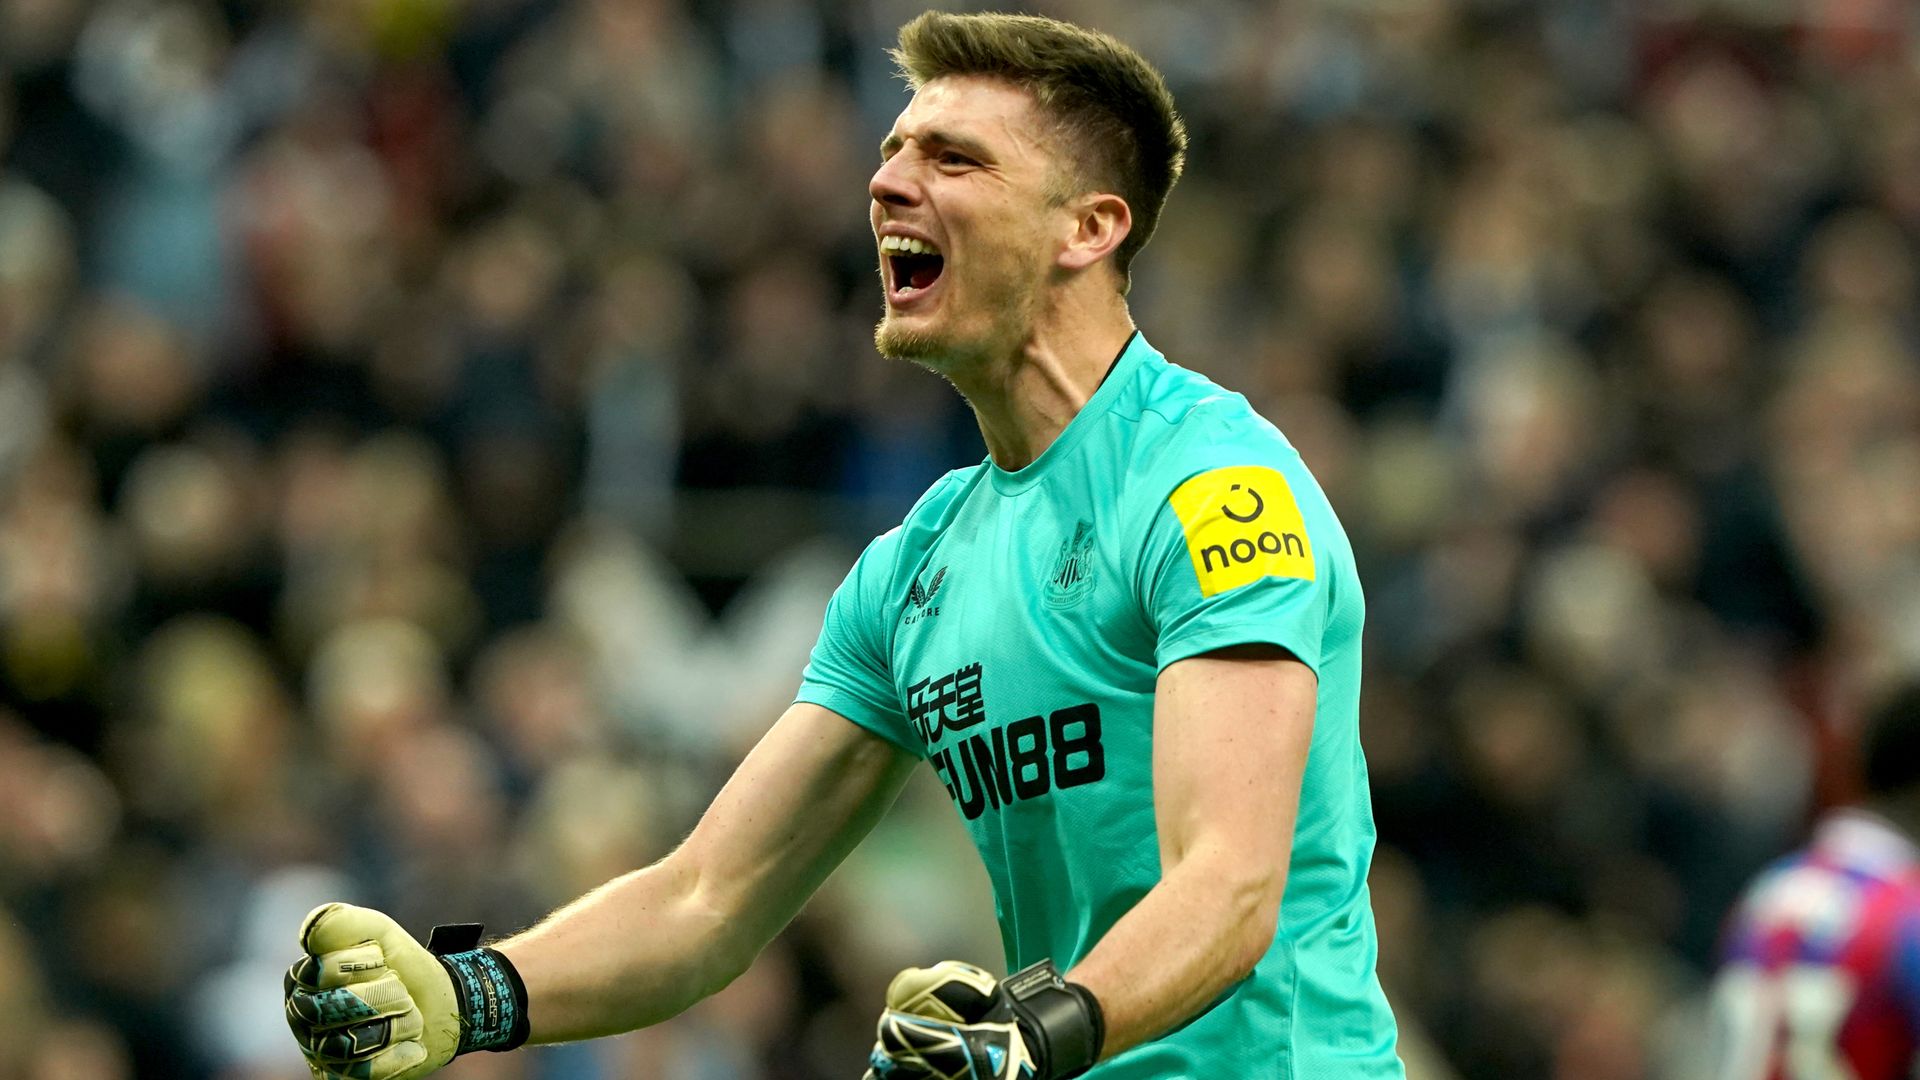 pope-shows-england-shootout-credentials-to-edge-newcastle-past-palace